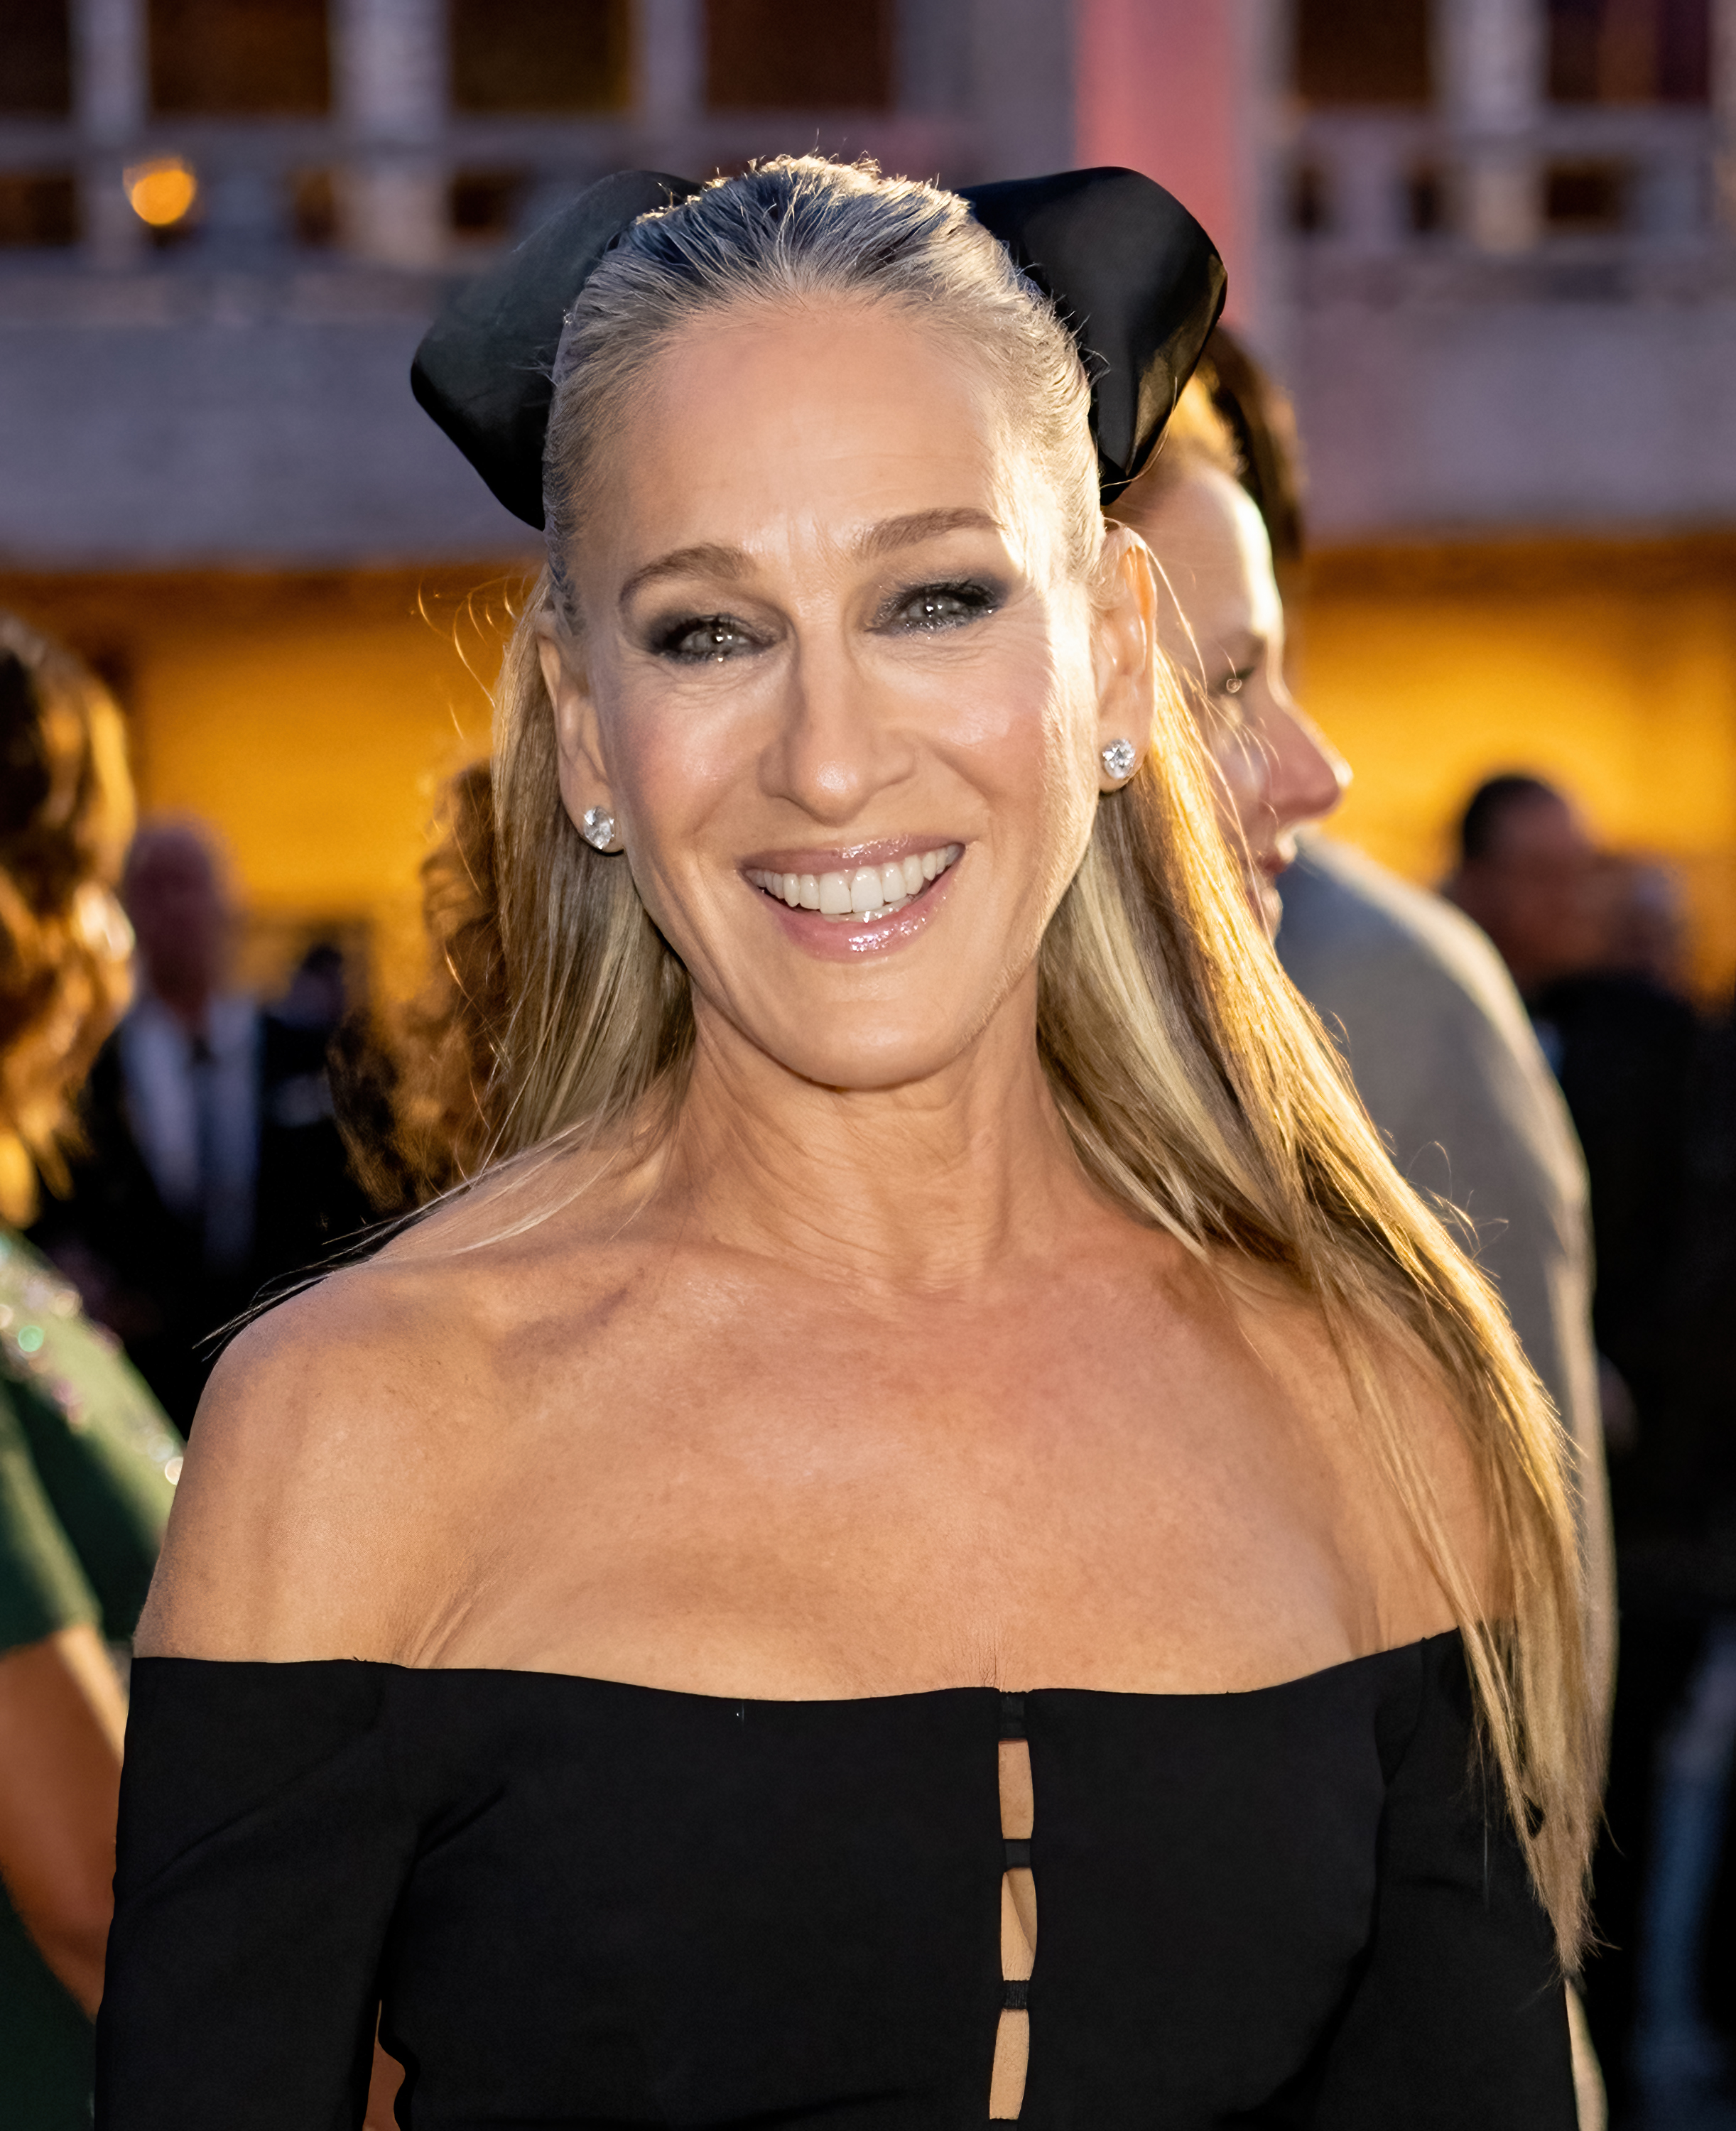 Sarah Jessica Parker at the New York City Ballet's 2023 Fall Gala at Lincoln Center on October 5, 2023, in New York City. | Source: Getty Images